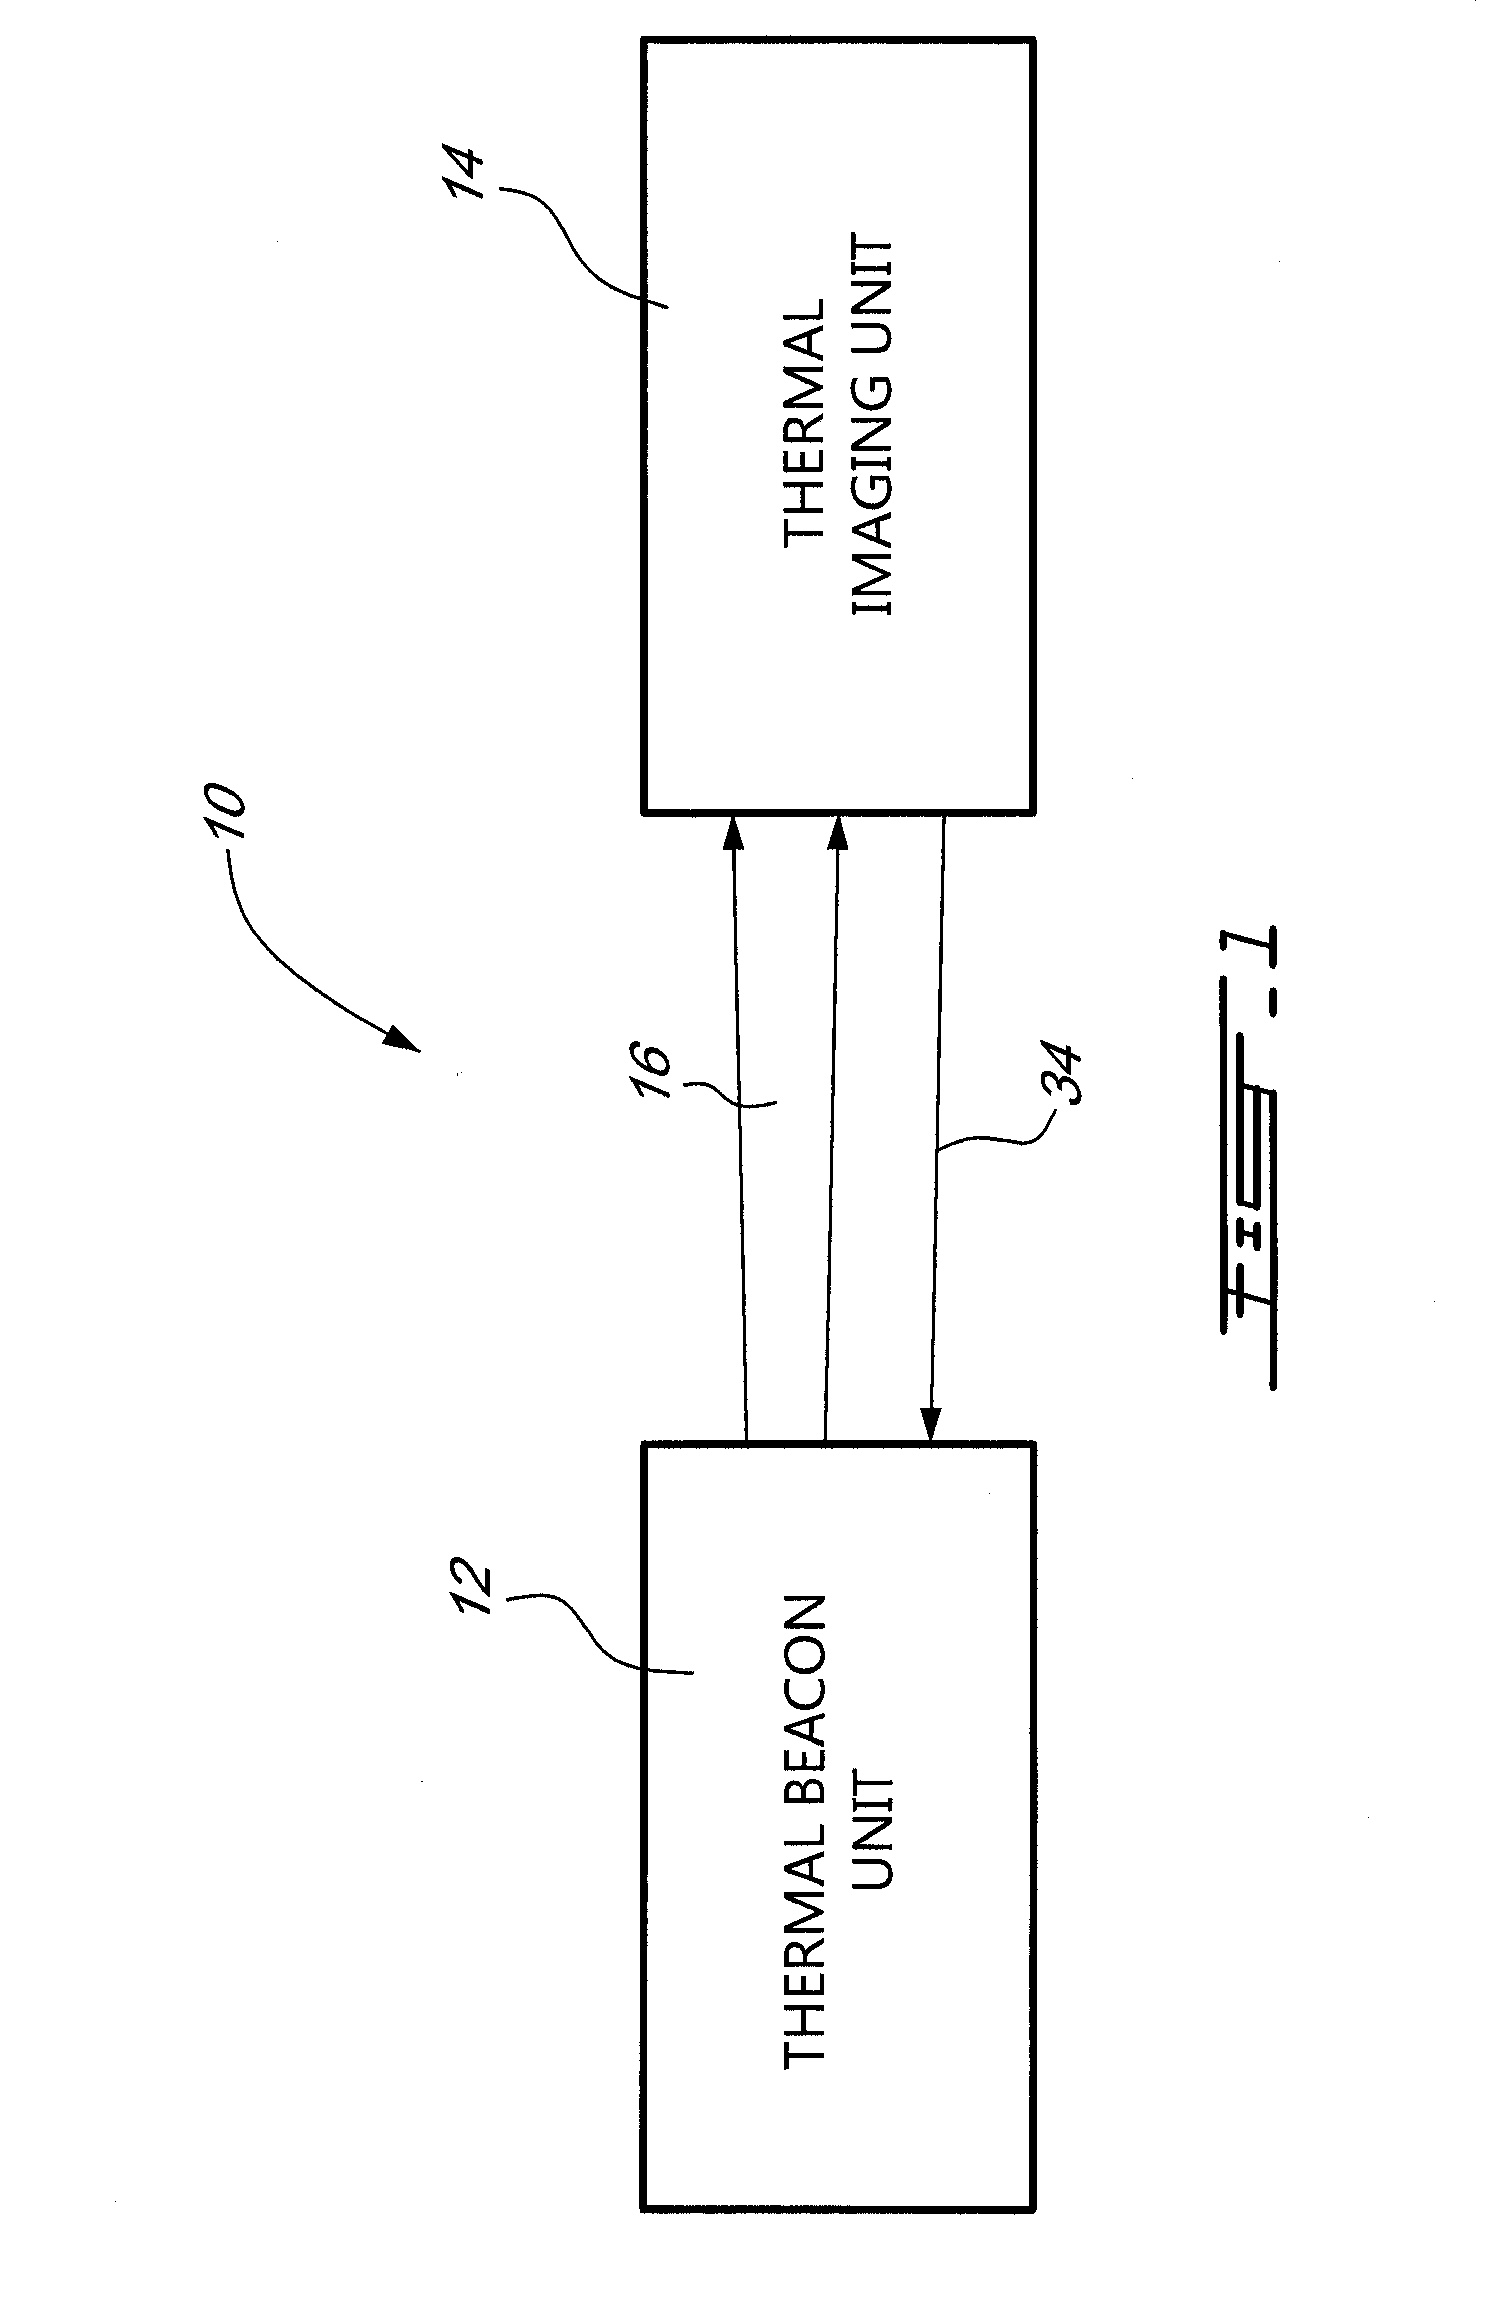 Identification system and method using highly collimated source of electromagnetic radiation